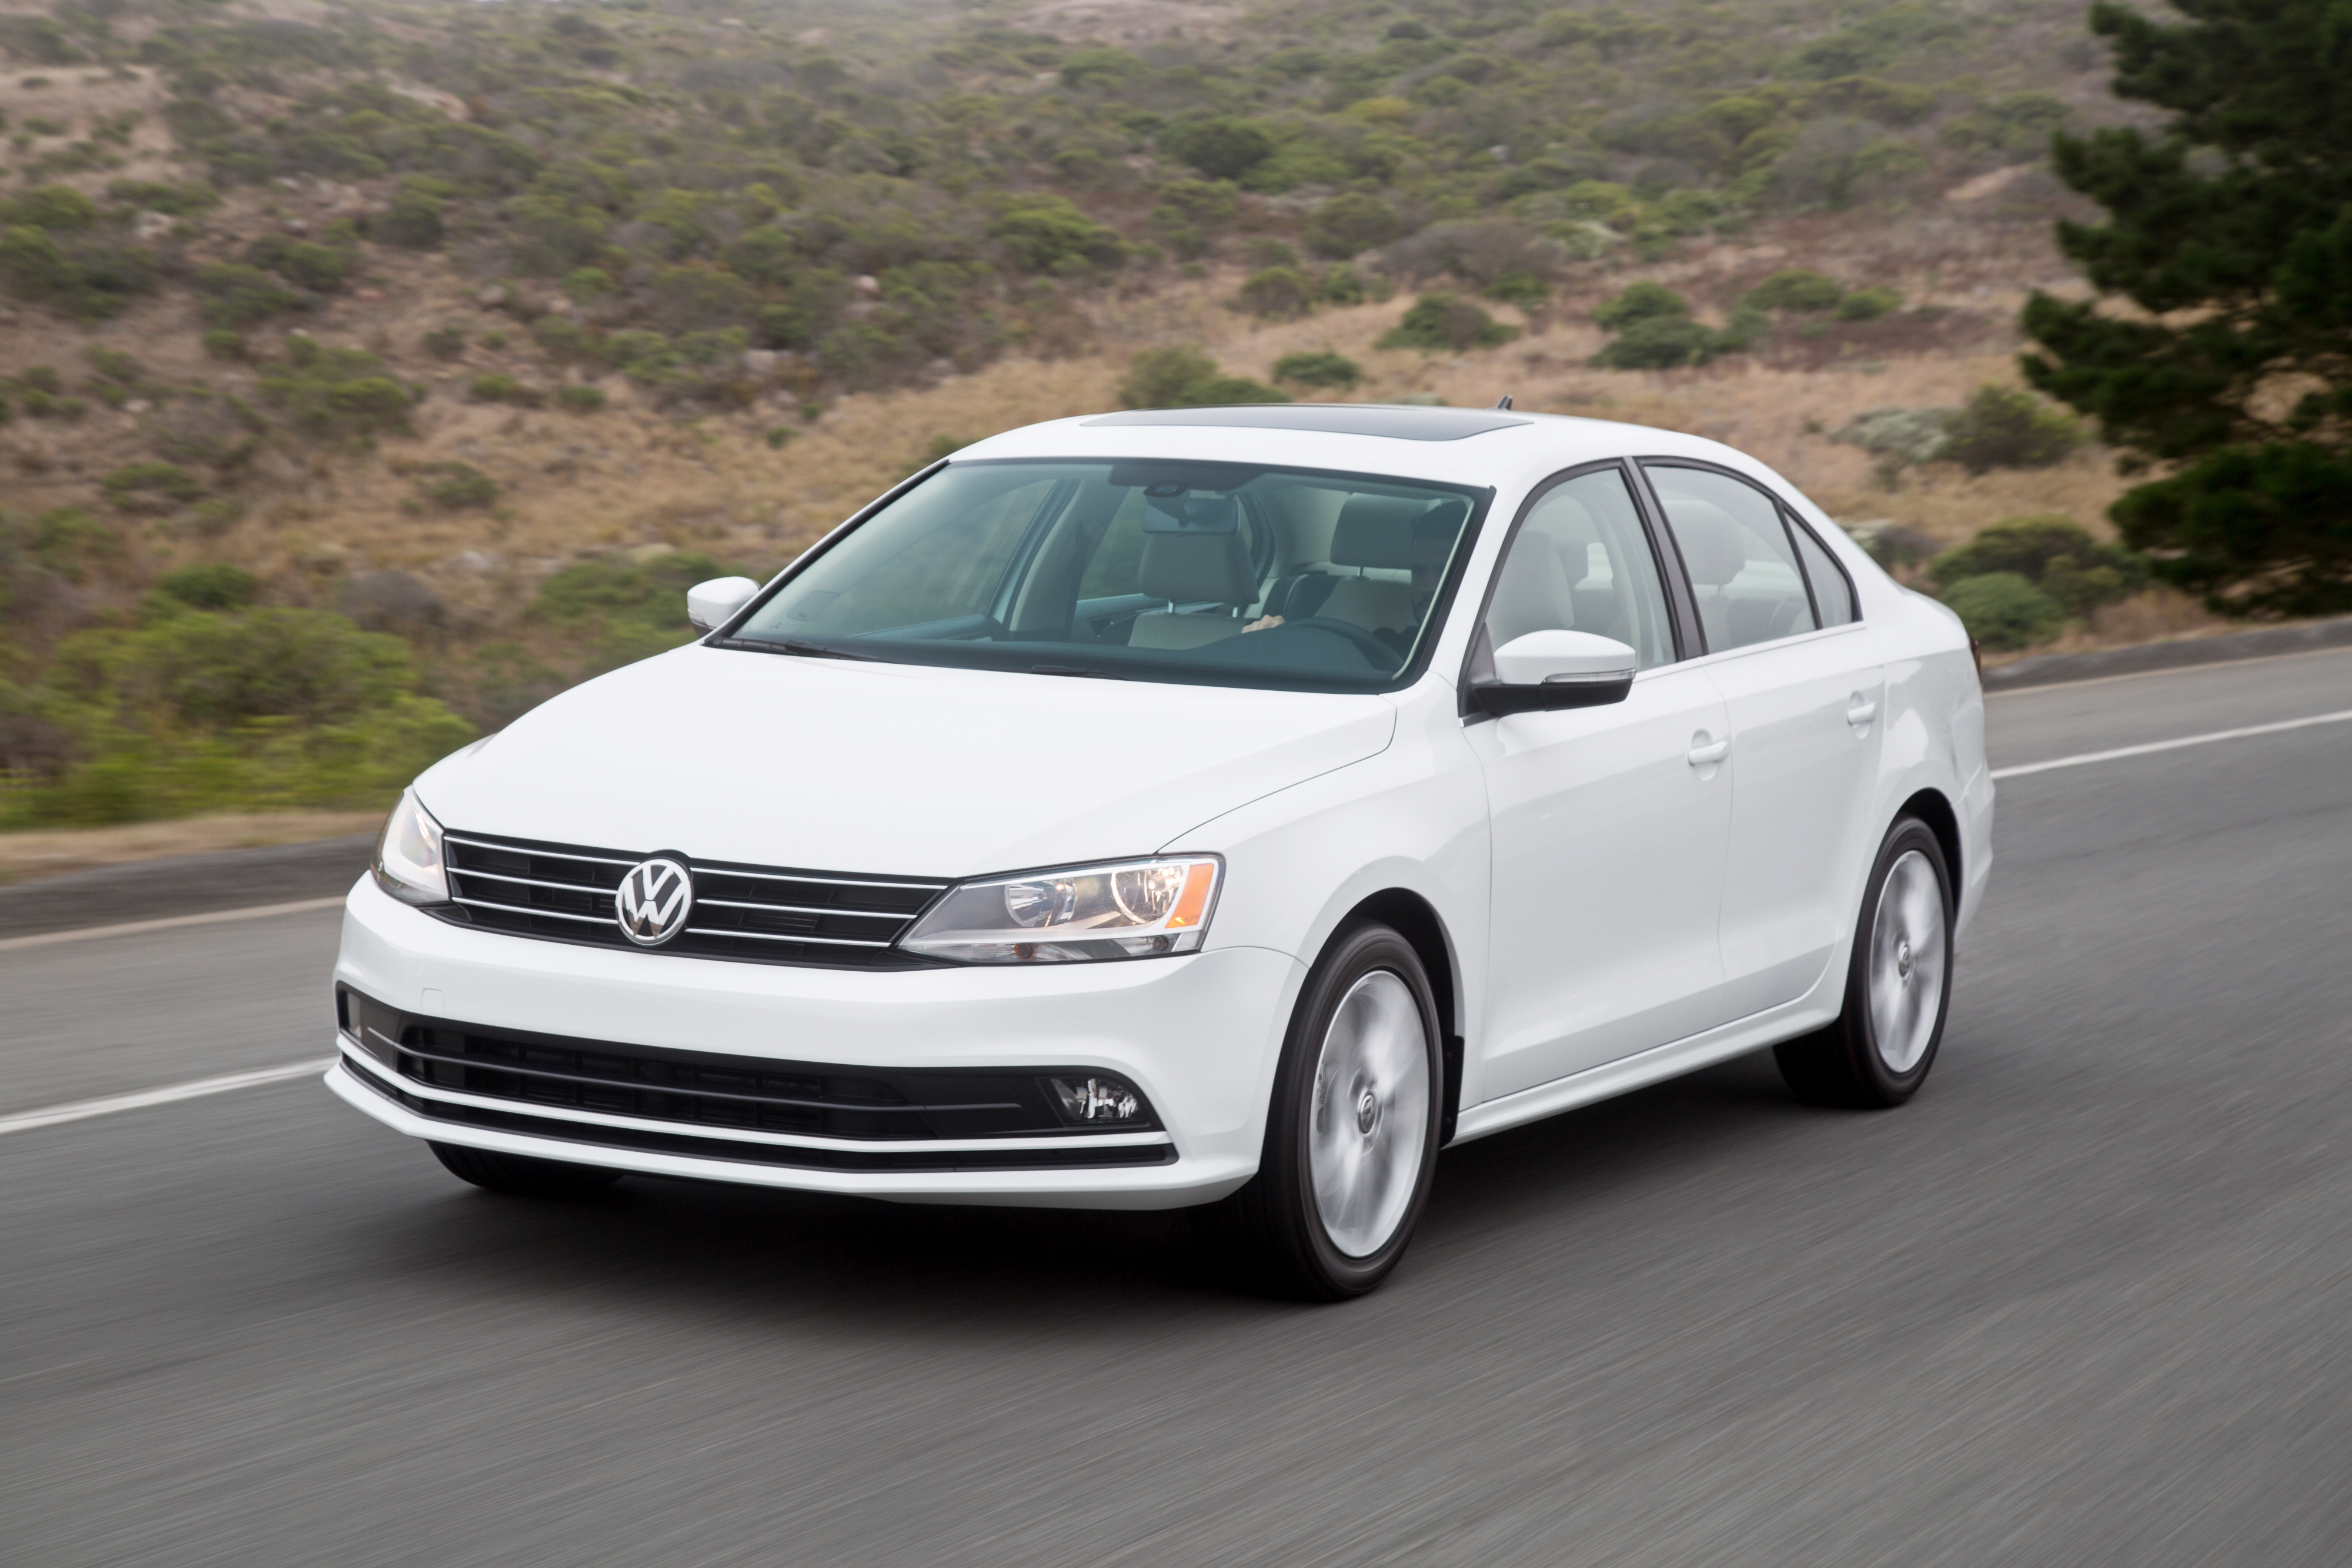 Auto Review: 2016 Volkswagen Jetta With Google Play